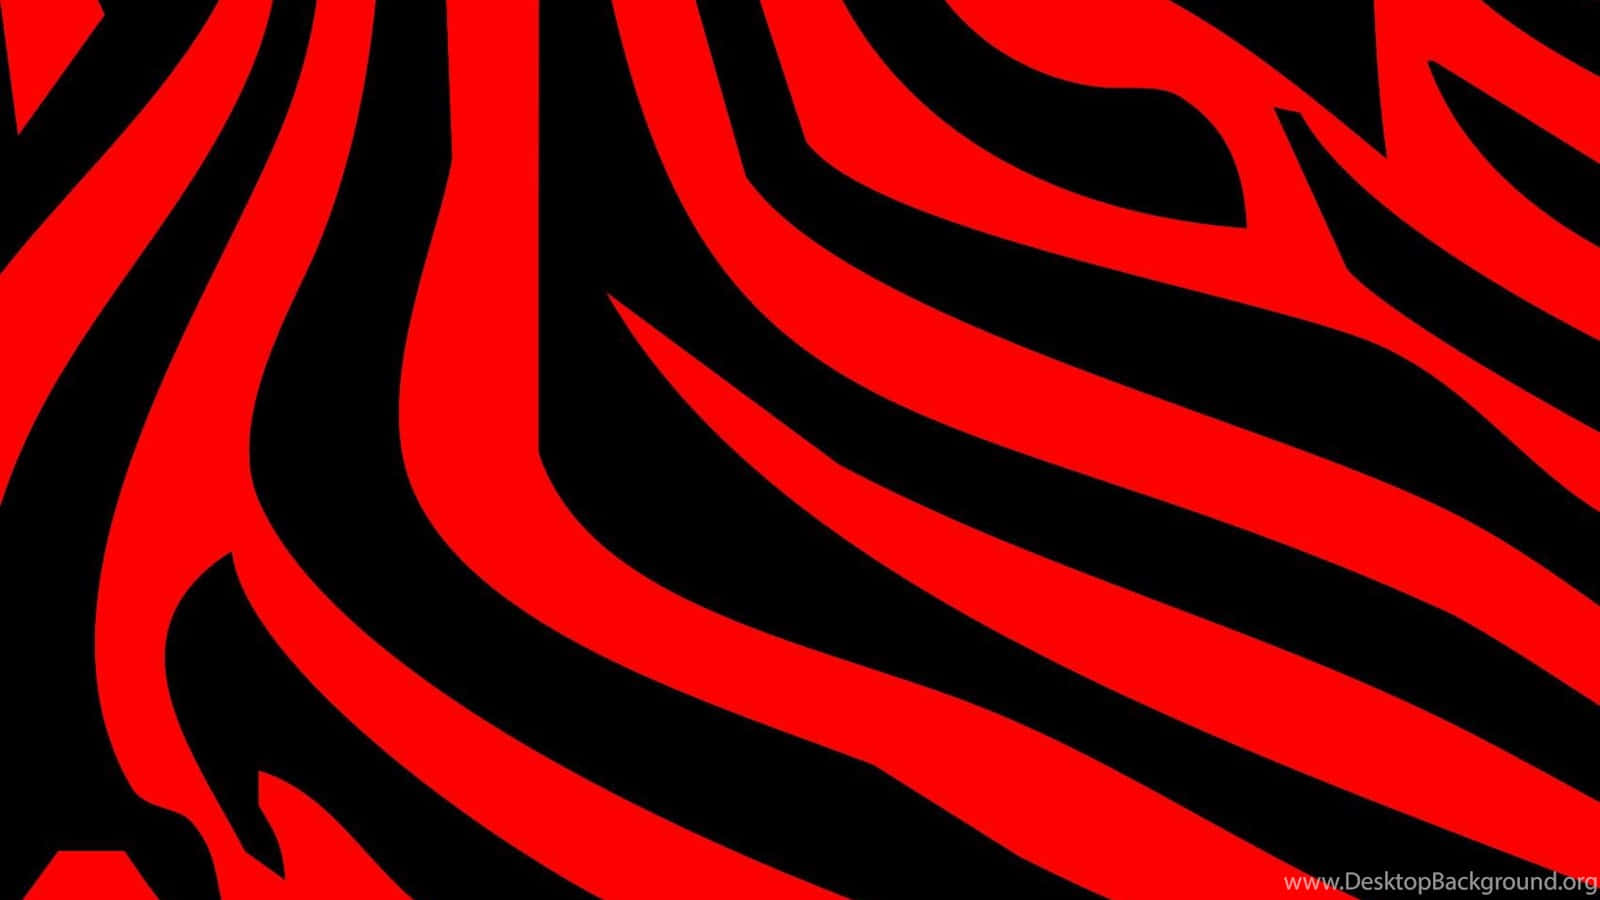 A Red And Black Zebra Print Background Wallpaper